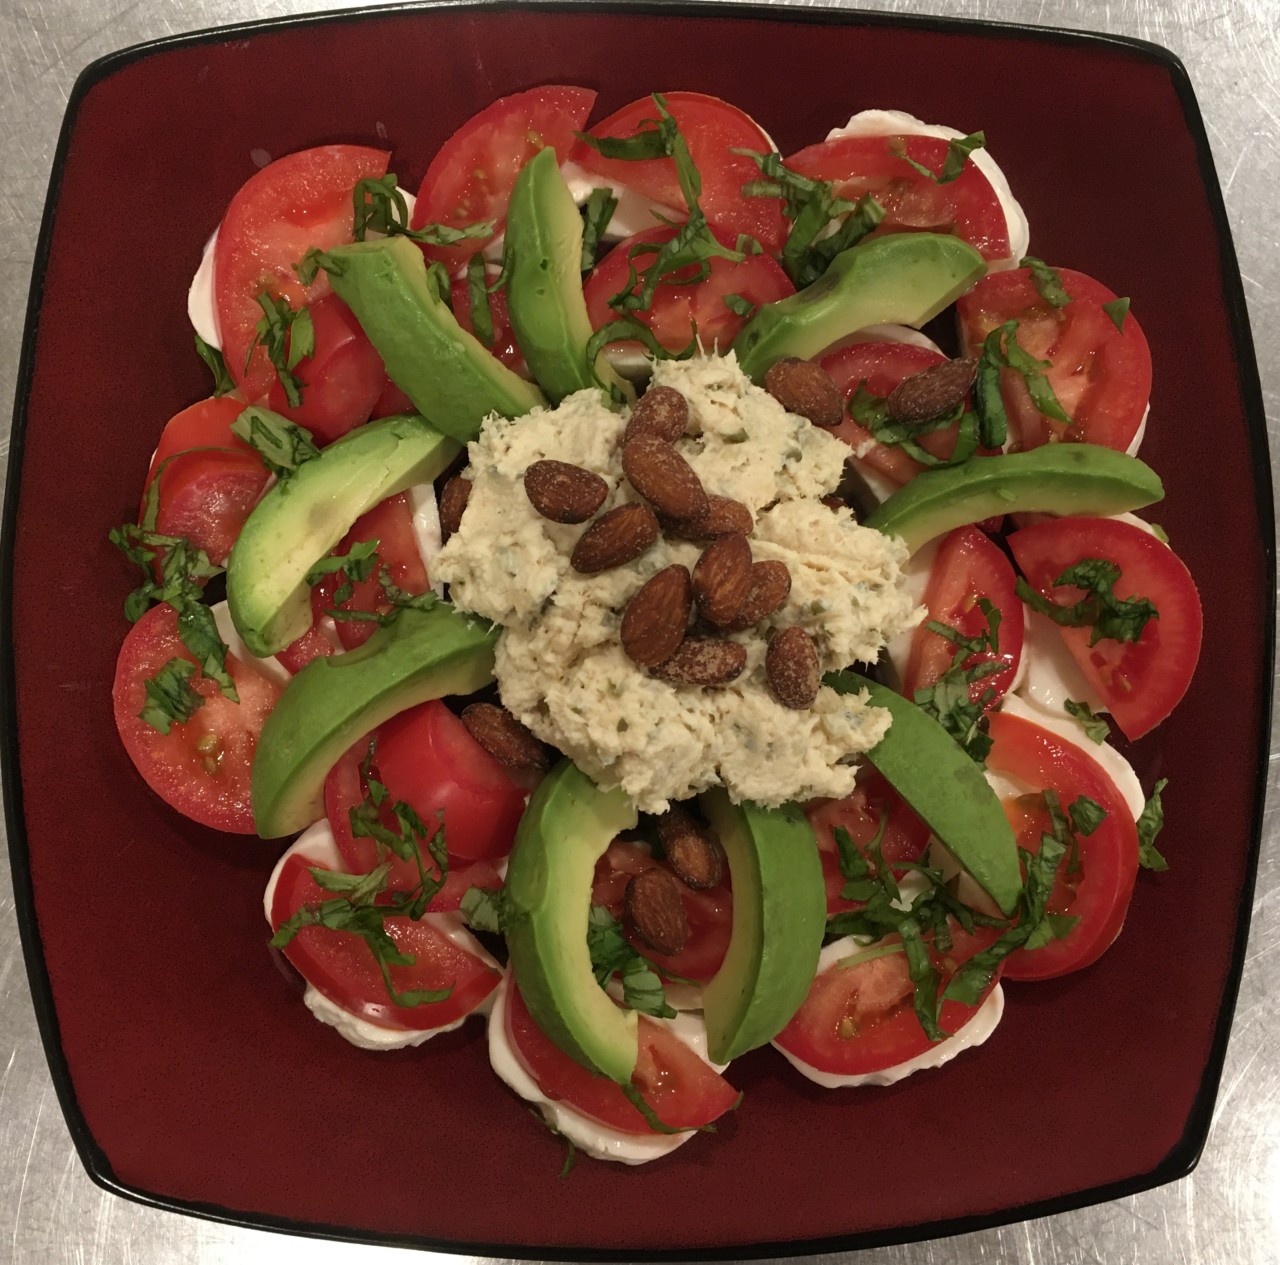 <a class="bx-tag" rel="tag" href="https://streetloc.com/view-channel-profile/whatsfordinner"><s>#</s><b>whatsfordinner</b></a> Chicken Salad, surrounded by Caprese with fresh Basil and Avocado, sprinkled with a few Smoked Almonds. <a class="bx-tag" rel="tag" href="https://streetloc.com/view-channel-profile/keto"><s>#</s><b>keto</b></a> <a class="bx-tag" rel="tag" href="https://streetloc.com/view-channel-profile/healthymito"><s>#</s><b>healthymito</b></a> <a class="bx-tag" rel="tag" href="https://streetloc.com/view-channel-profile/healthyeats"><s>#</s><b>healthyeats</b></a>